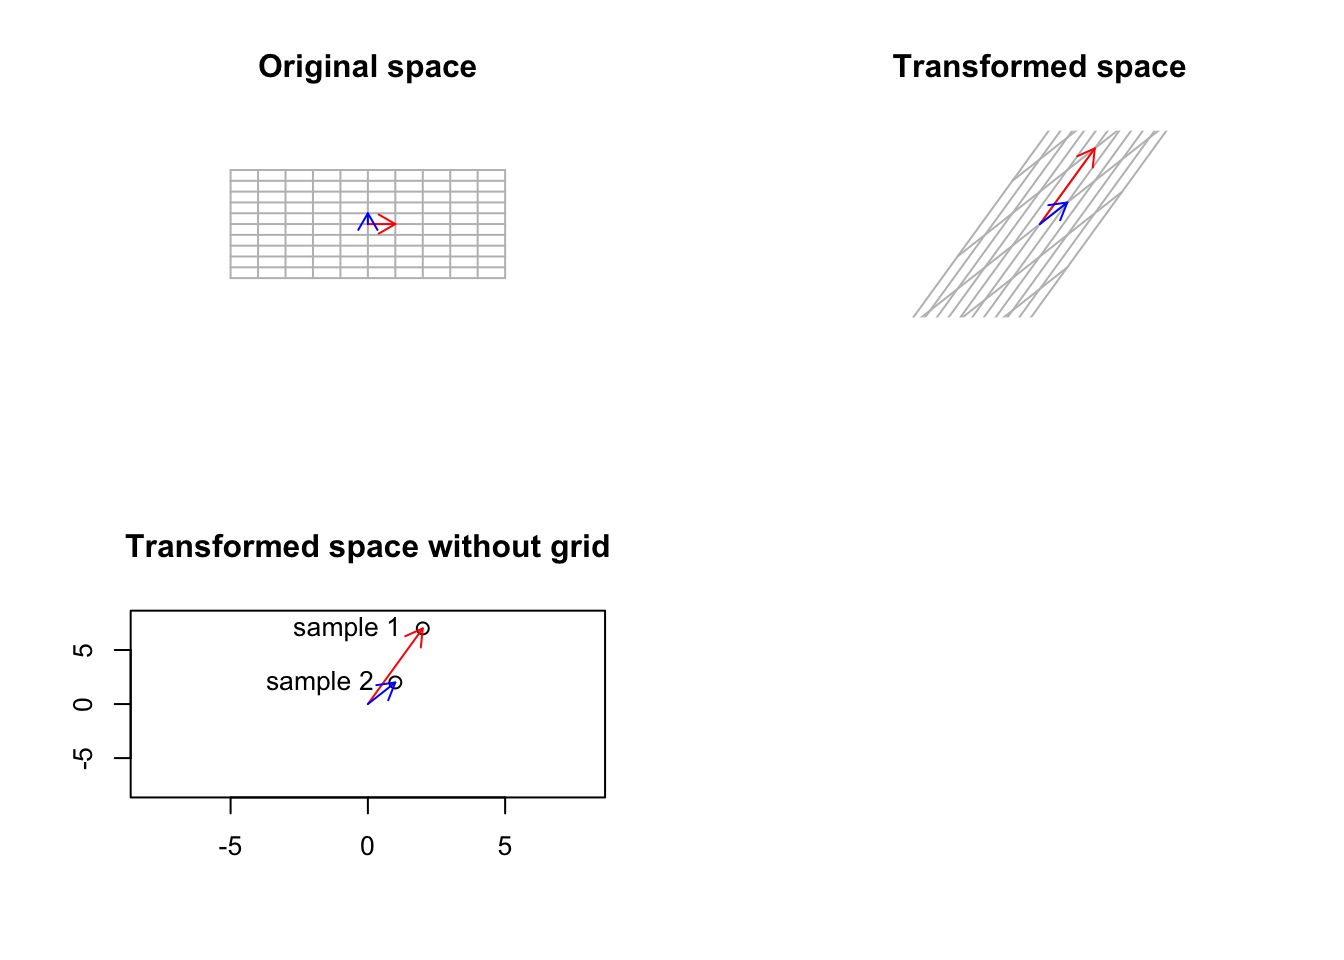 Smal gene expression matrix has been used to trasform a basic space